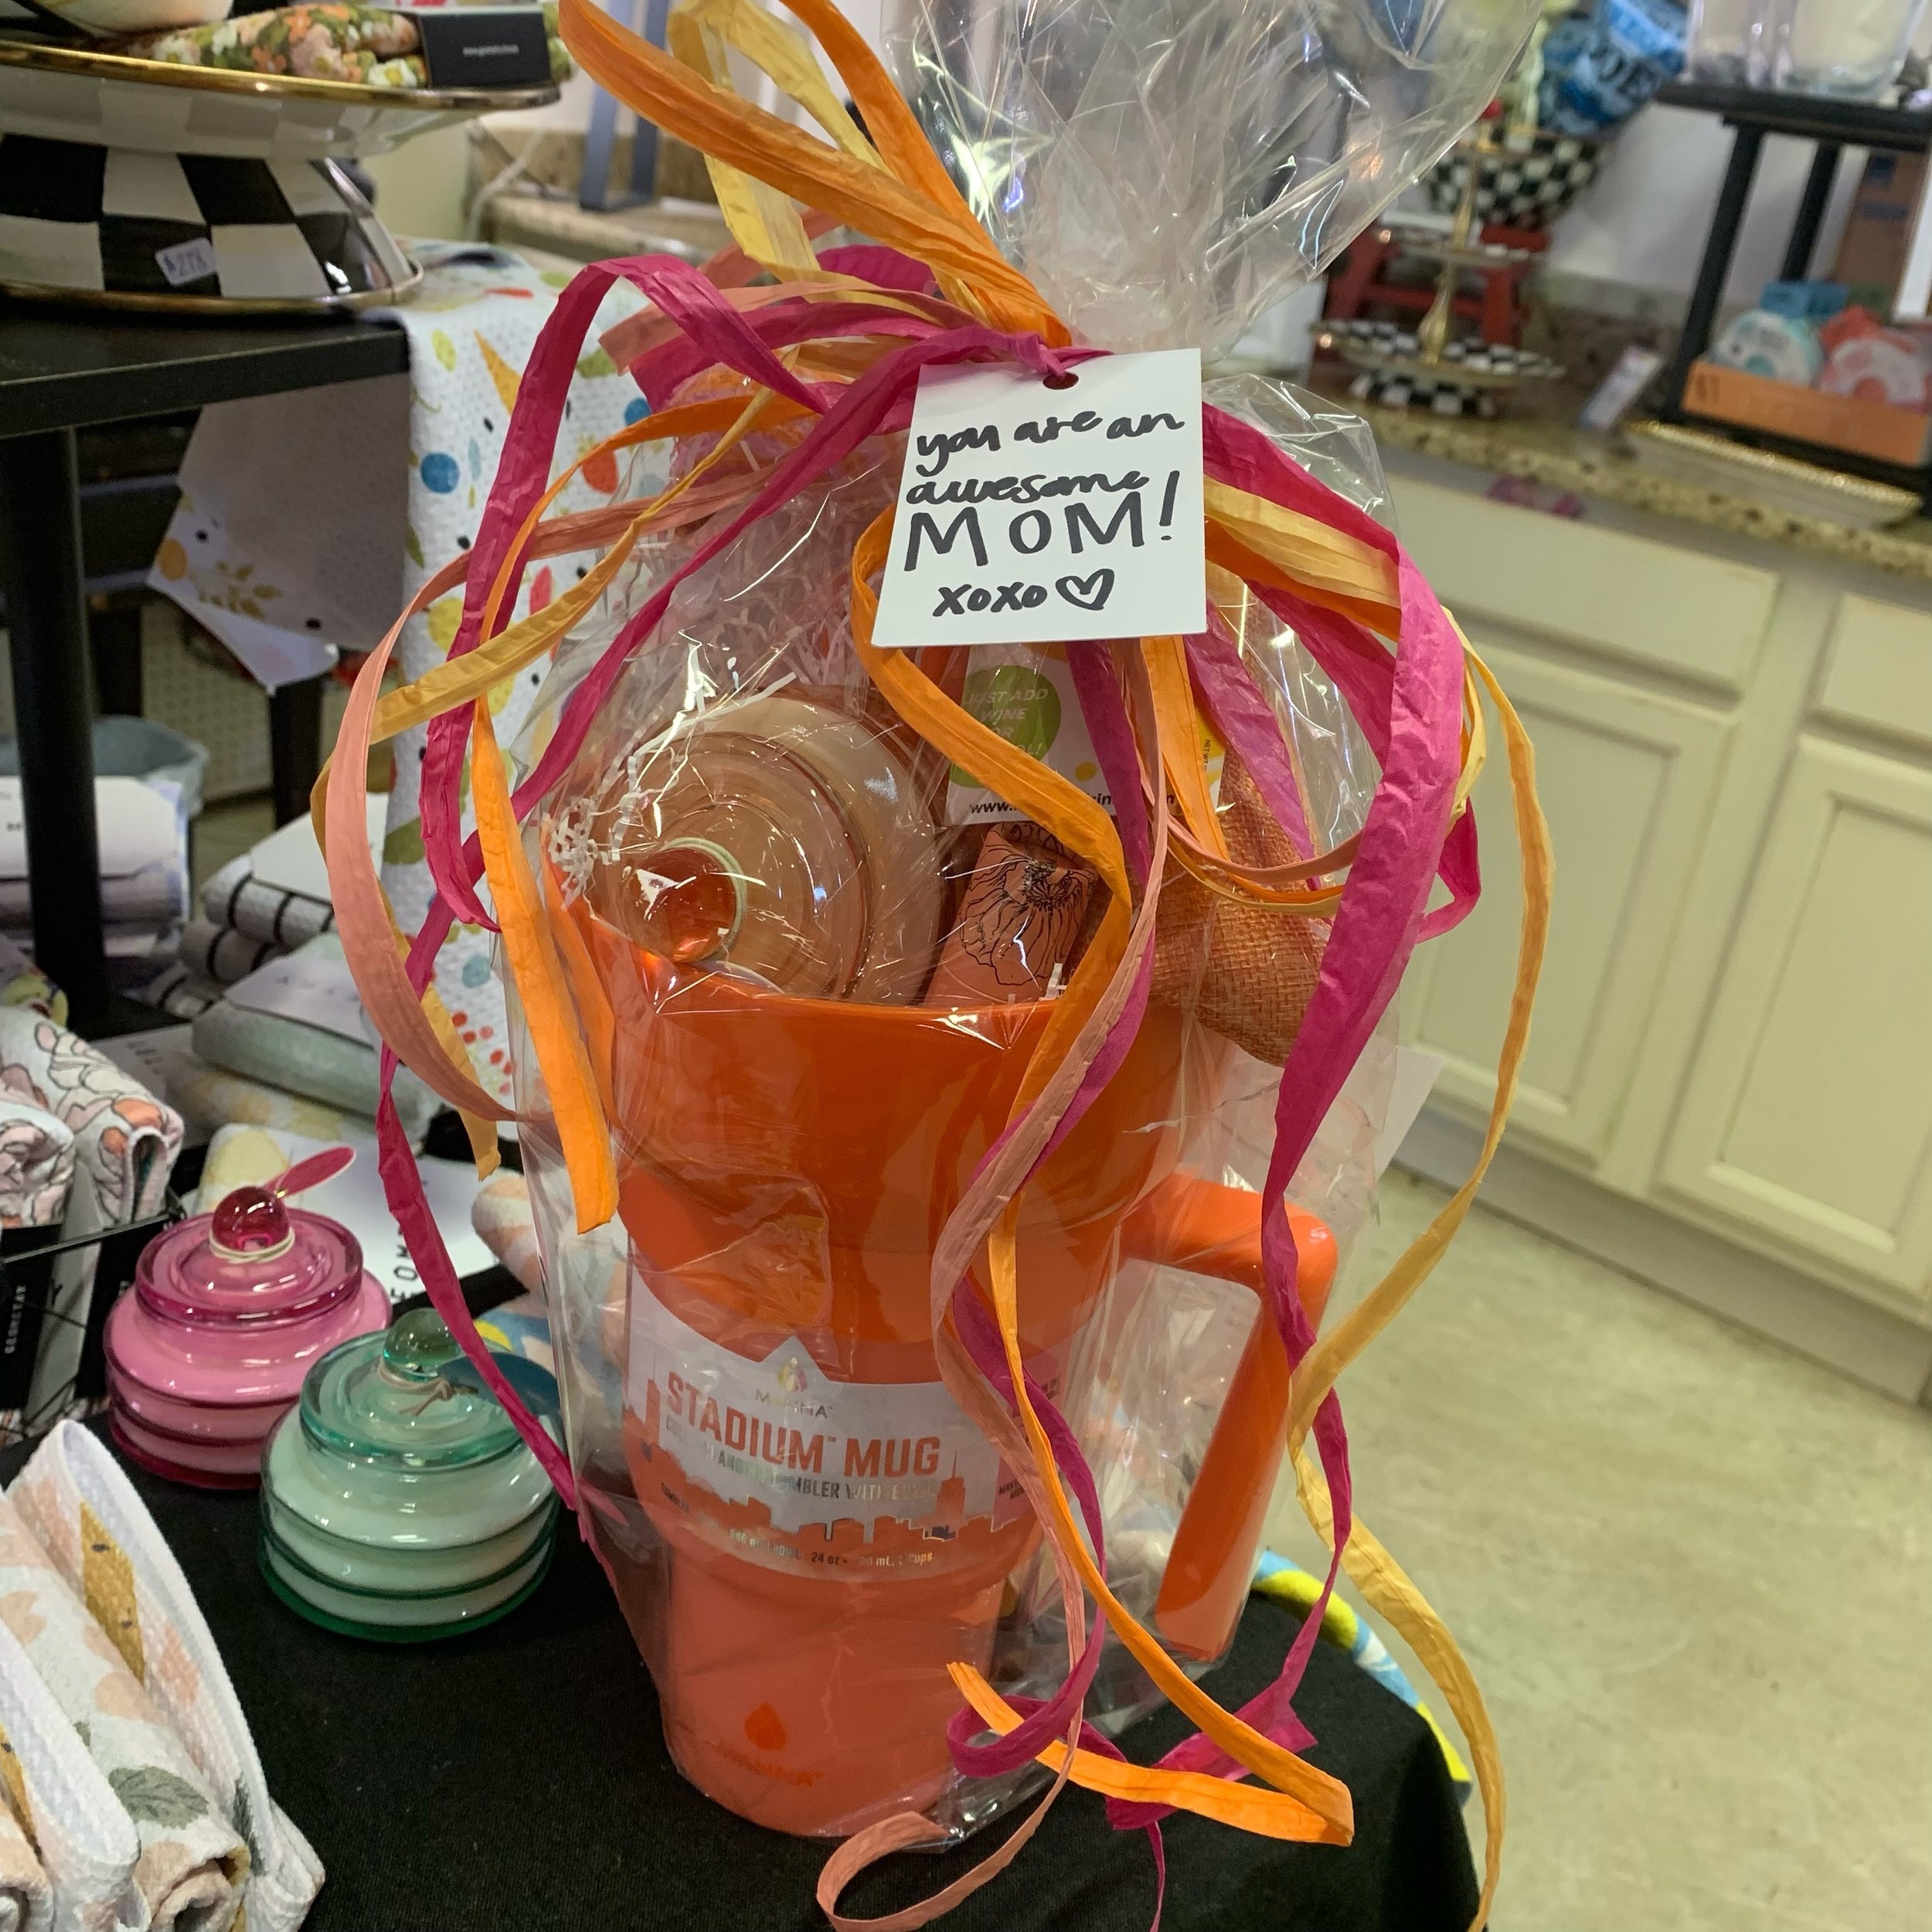 So cute!!! A stadium cup with Mom&rsquo;s favorite things from BAM? And free gift wrapping 🧡

Give the best gift, host the best gathering, have the most fun.
🏬Shop in Store: 321 Broadway, Paducah, KY
📞Call to order: 270.534.5951
📲Text a personal 